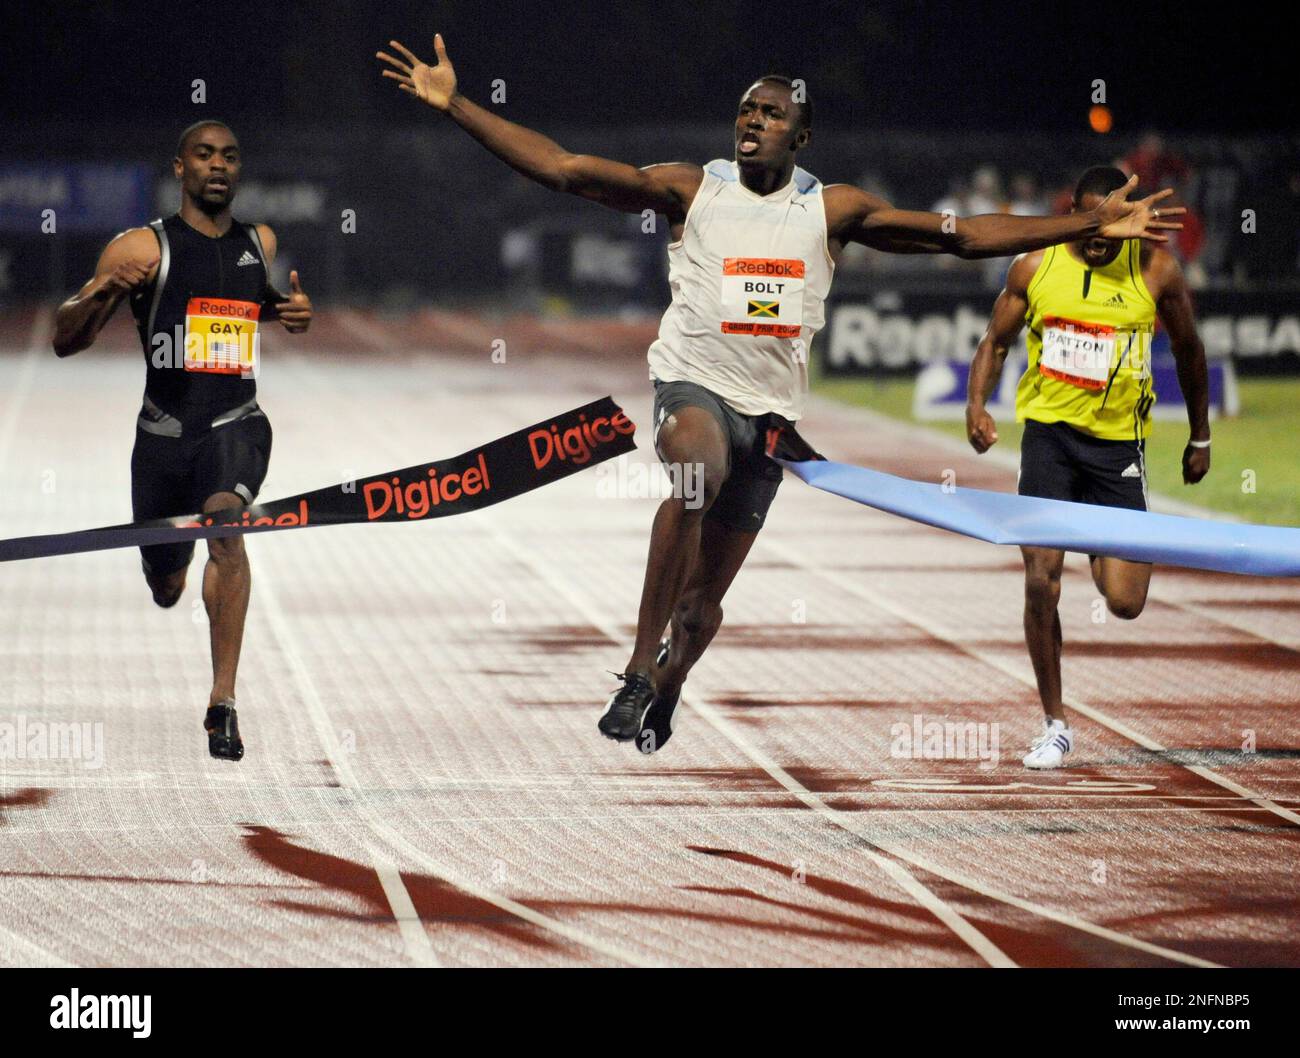 Jamaica's Usain Bolt breaks the tape with a world record time of 9.72 in  the Men's 100 Meter Dash at the Reebok Grand Prix athletic meet Saturday  night, May 31, 2008 at Icahn Stadium in New York. (AP Photo/Bill Kostroun  Stock Photo - Alamy